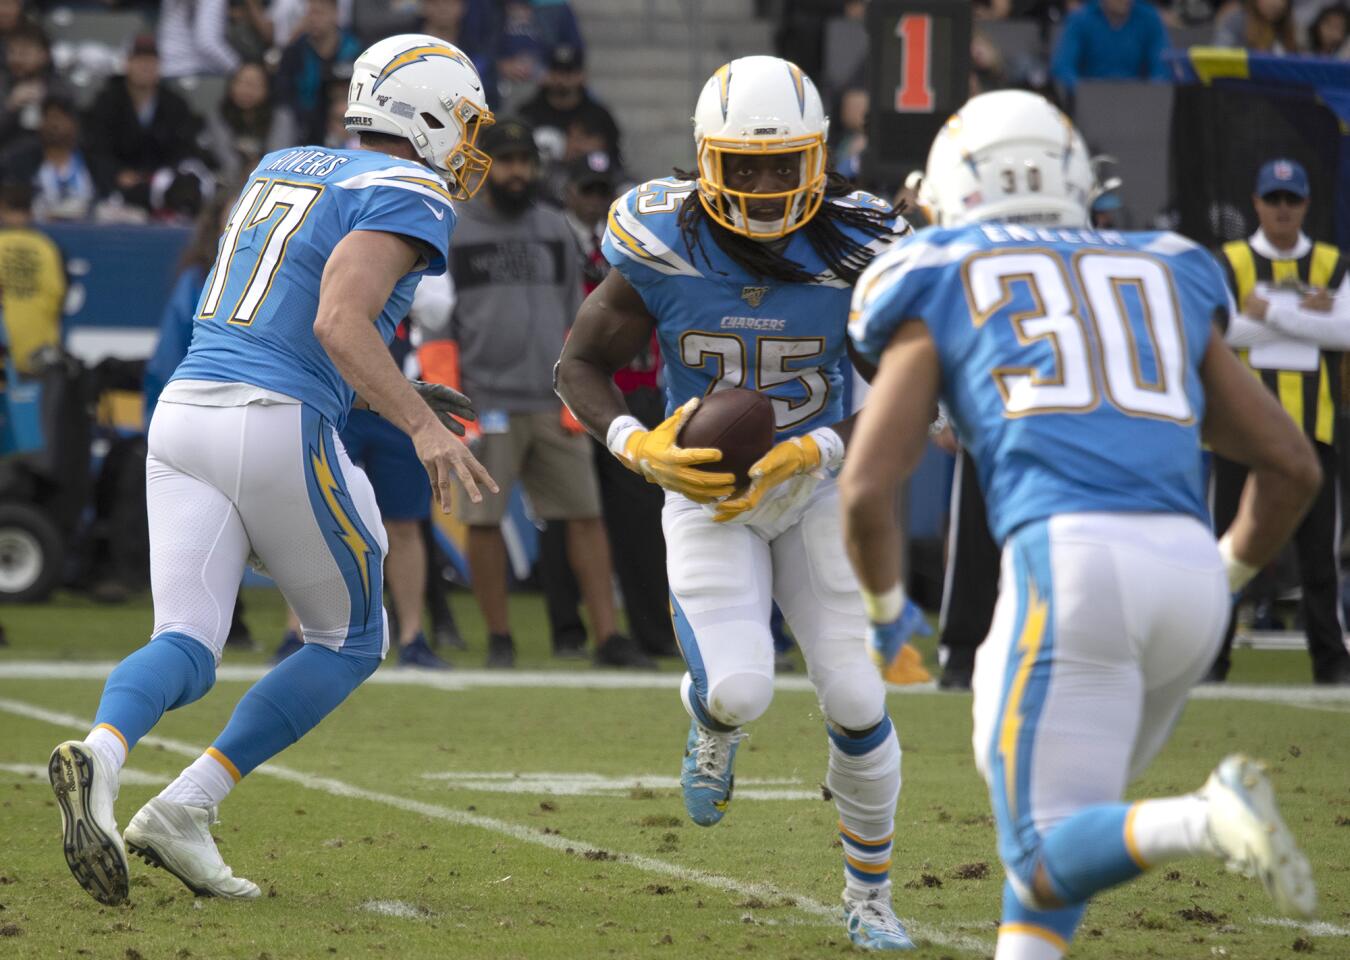 Chargers running back Melvin Gordon, center, looks to handoff to teammate Austin Ekeler (30) on a reverse against Oakland Raiders.